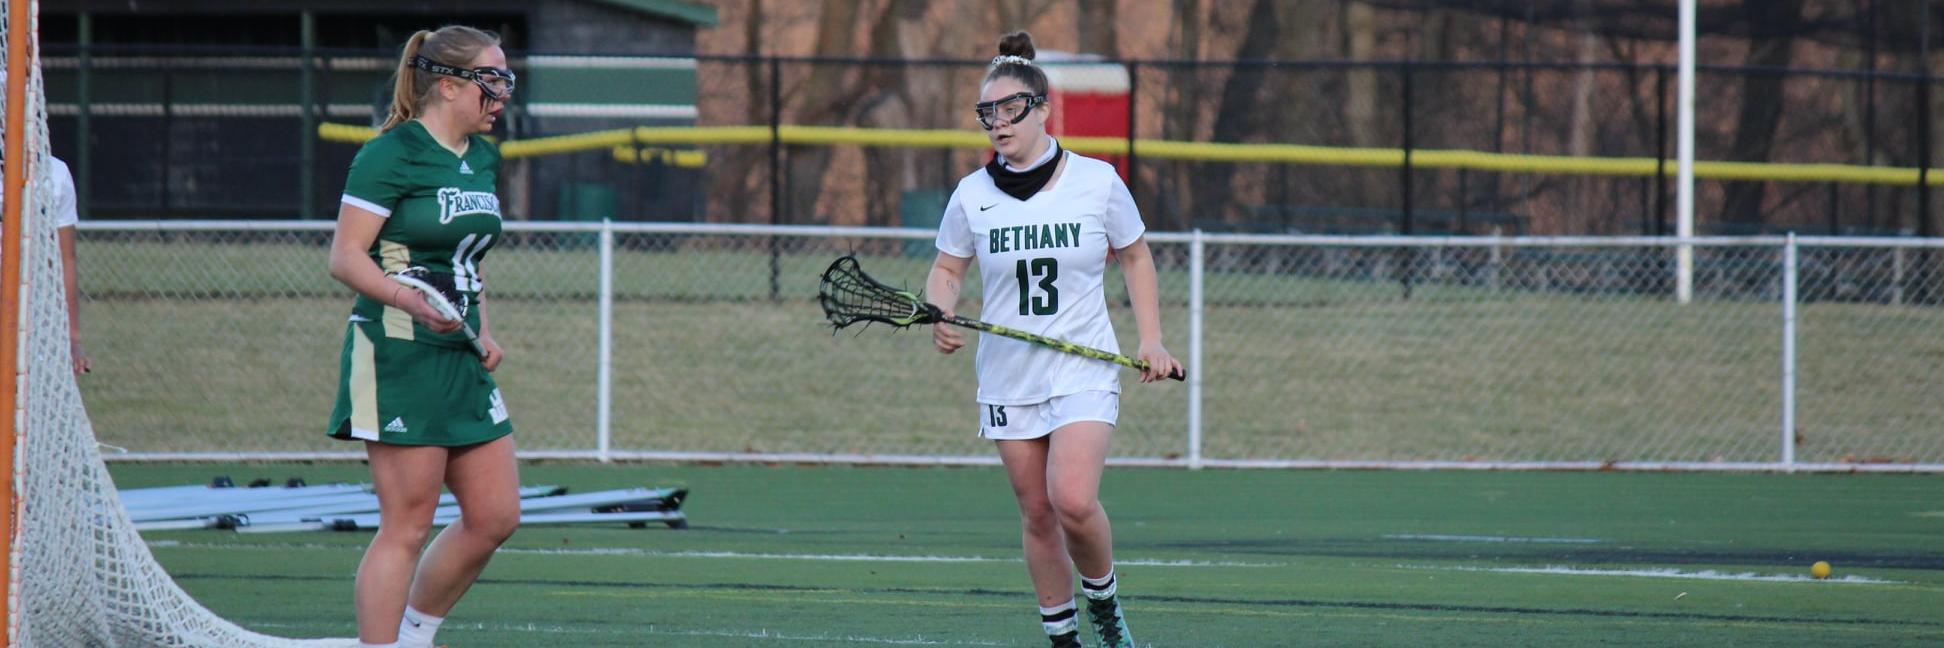 Women's Lacrosse: Bison Cruise to Victory at Waynesburg